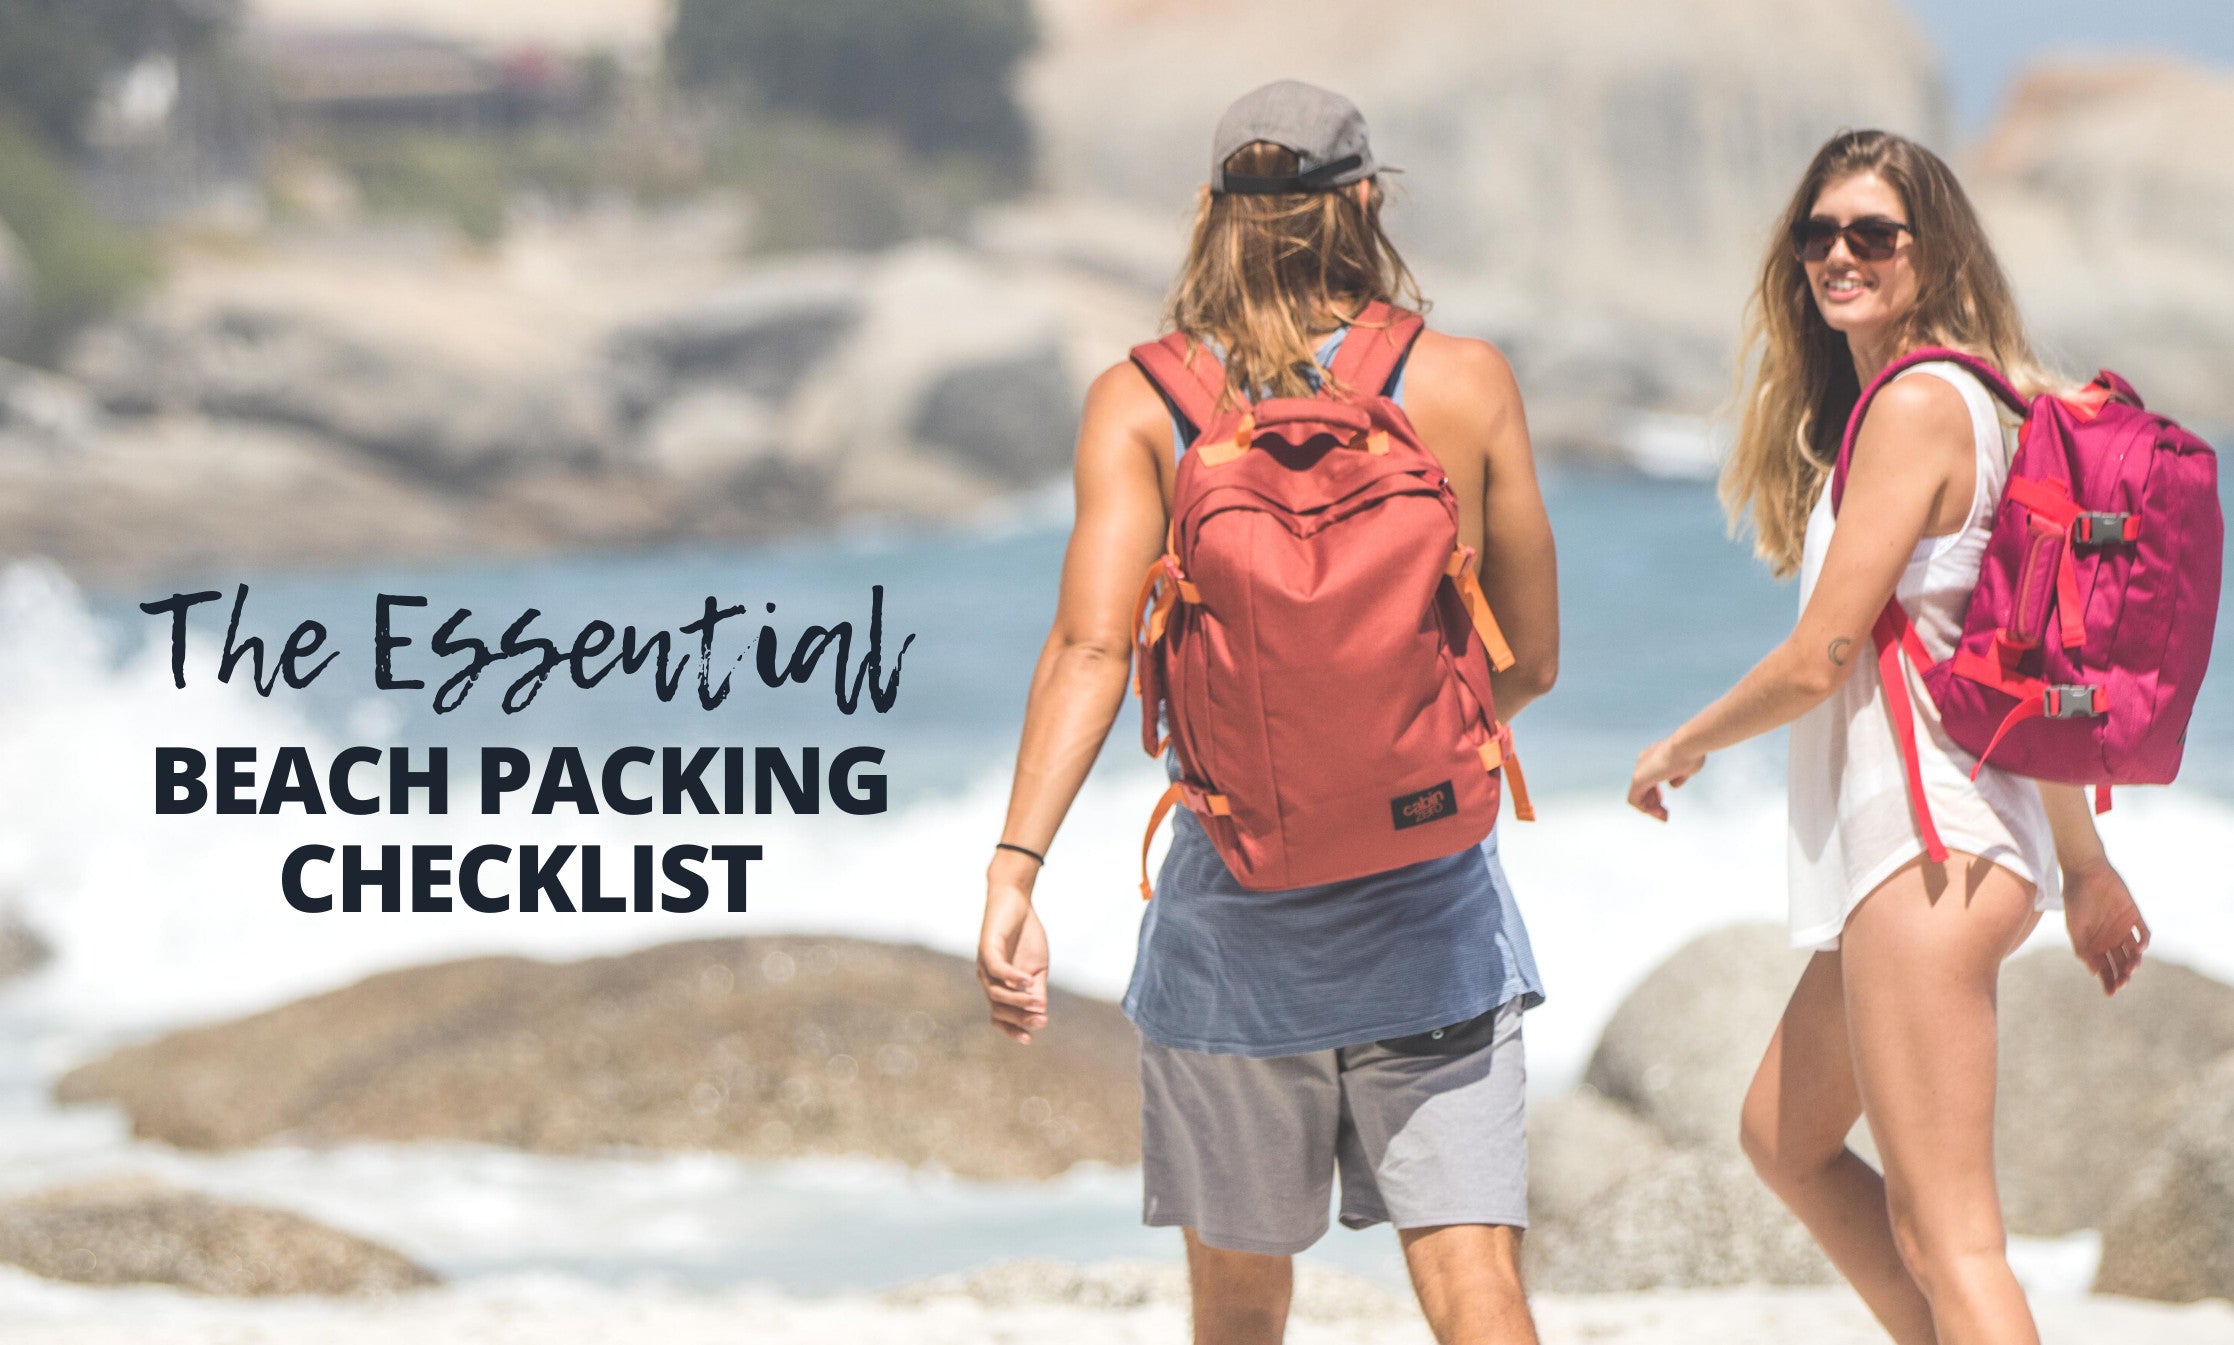 The Ultimate Beach Packing List for Your Next Family Beach Vacation